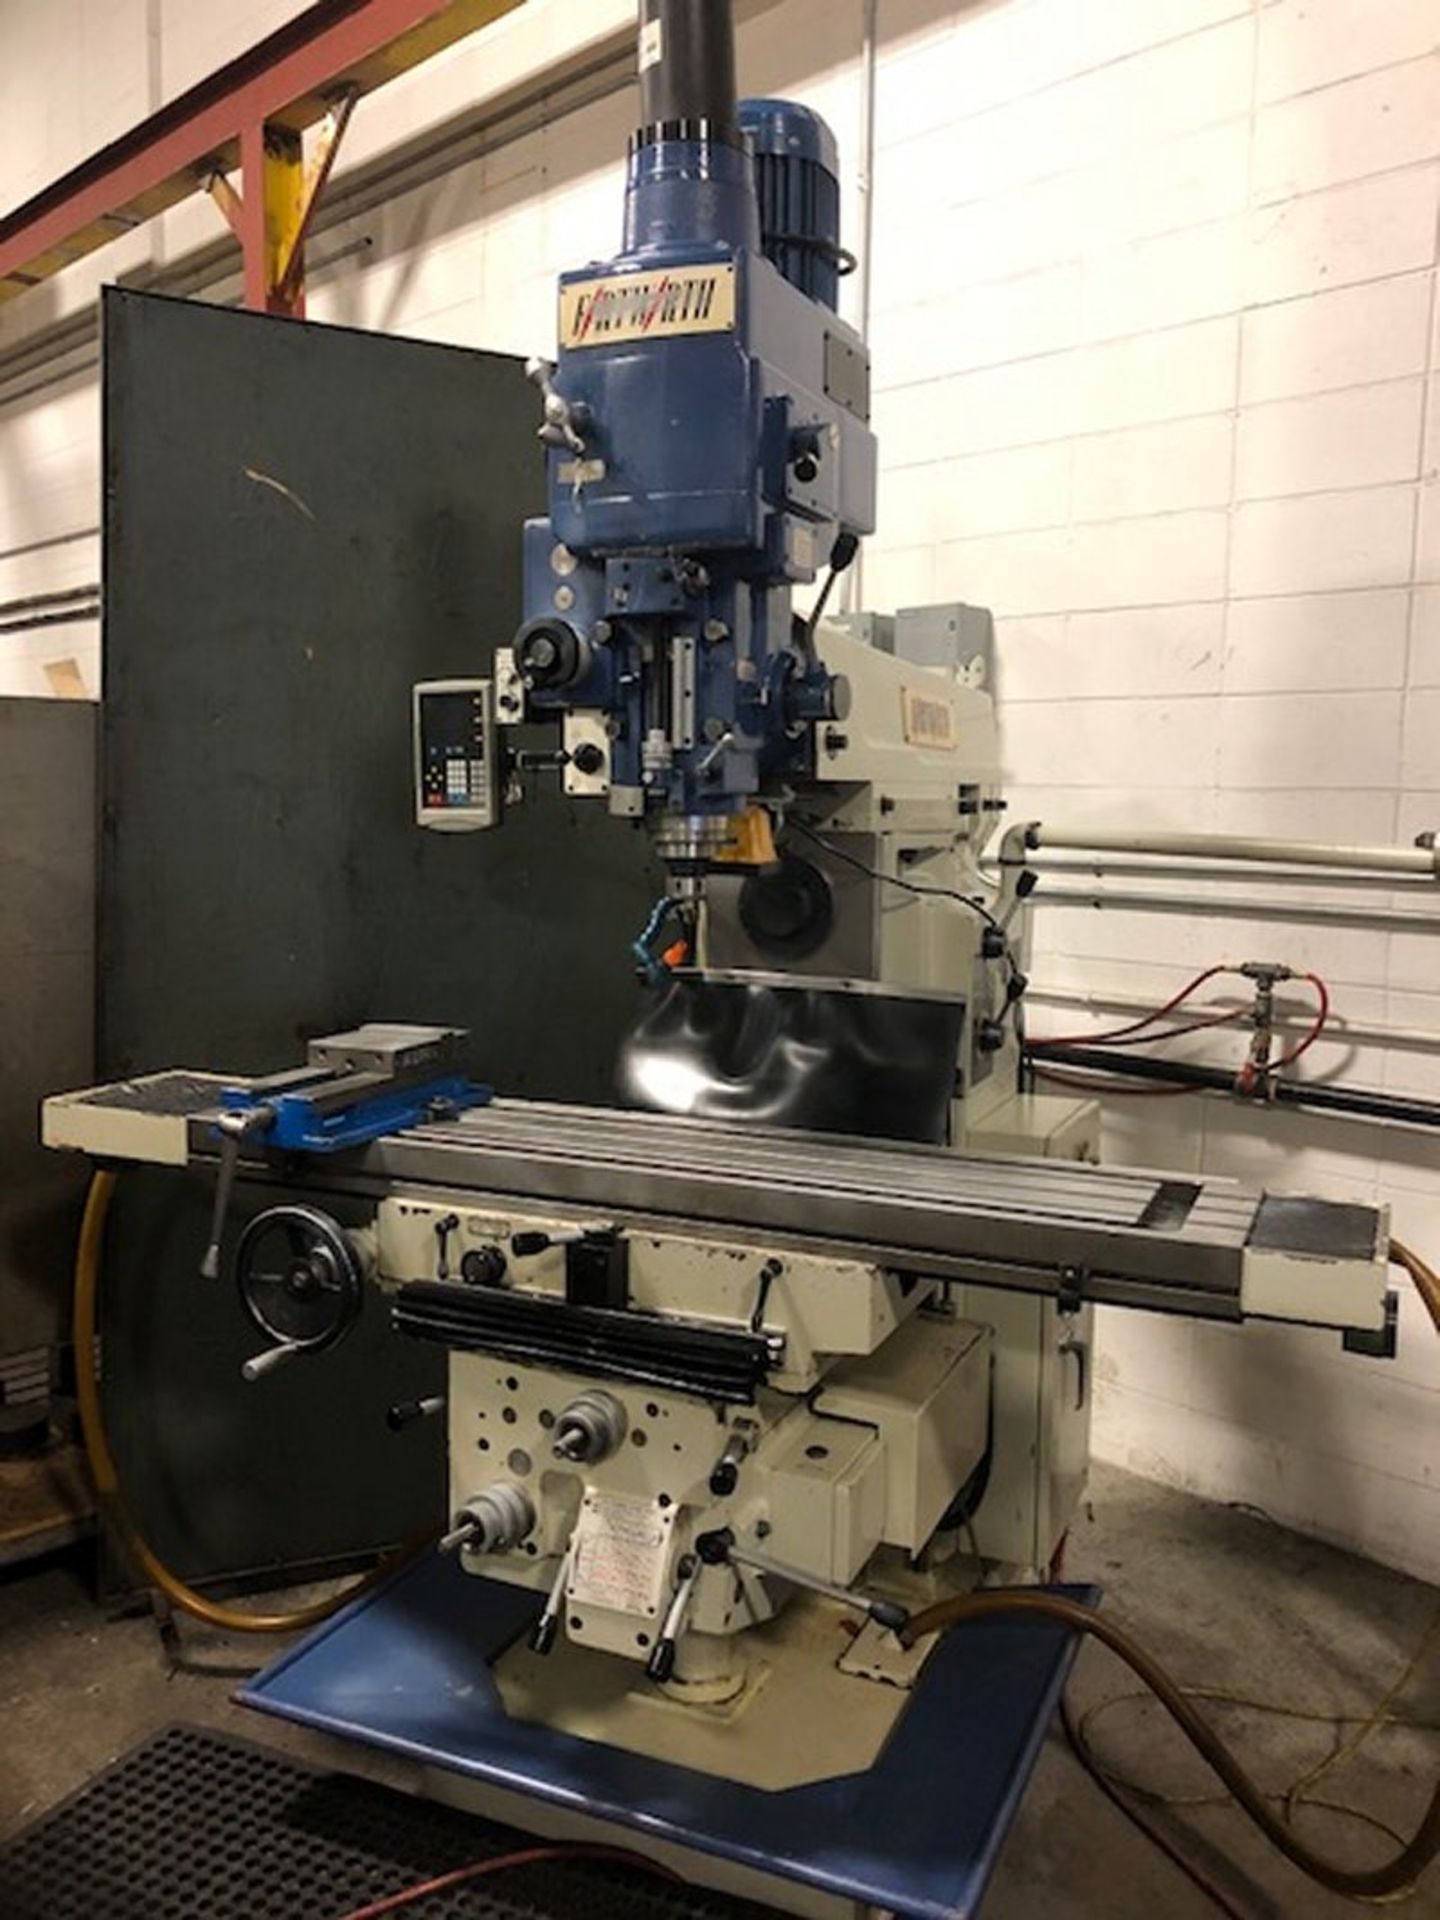 FORT WORTH G450B HORIZONTAL MILLING MACHINE, 2005, S/N 2B459 12IN X 60IN TABLE, NEWALL 3 AXIS - Image 4 of 7